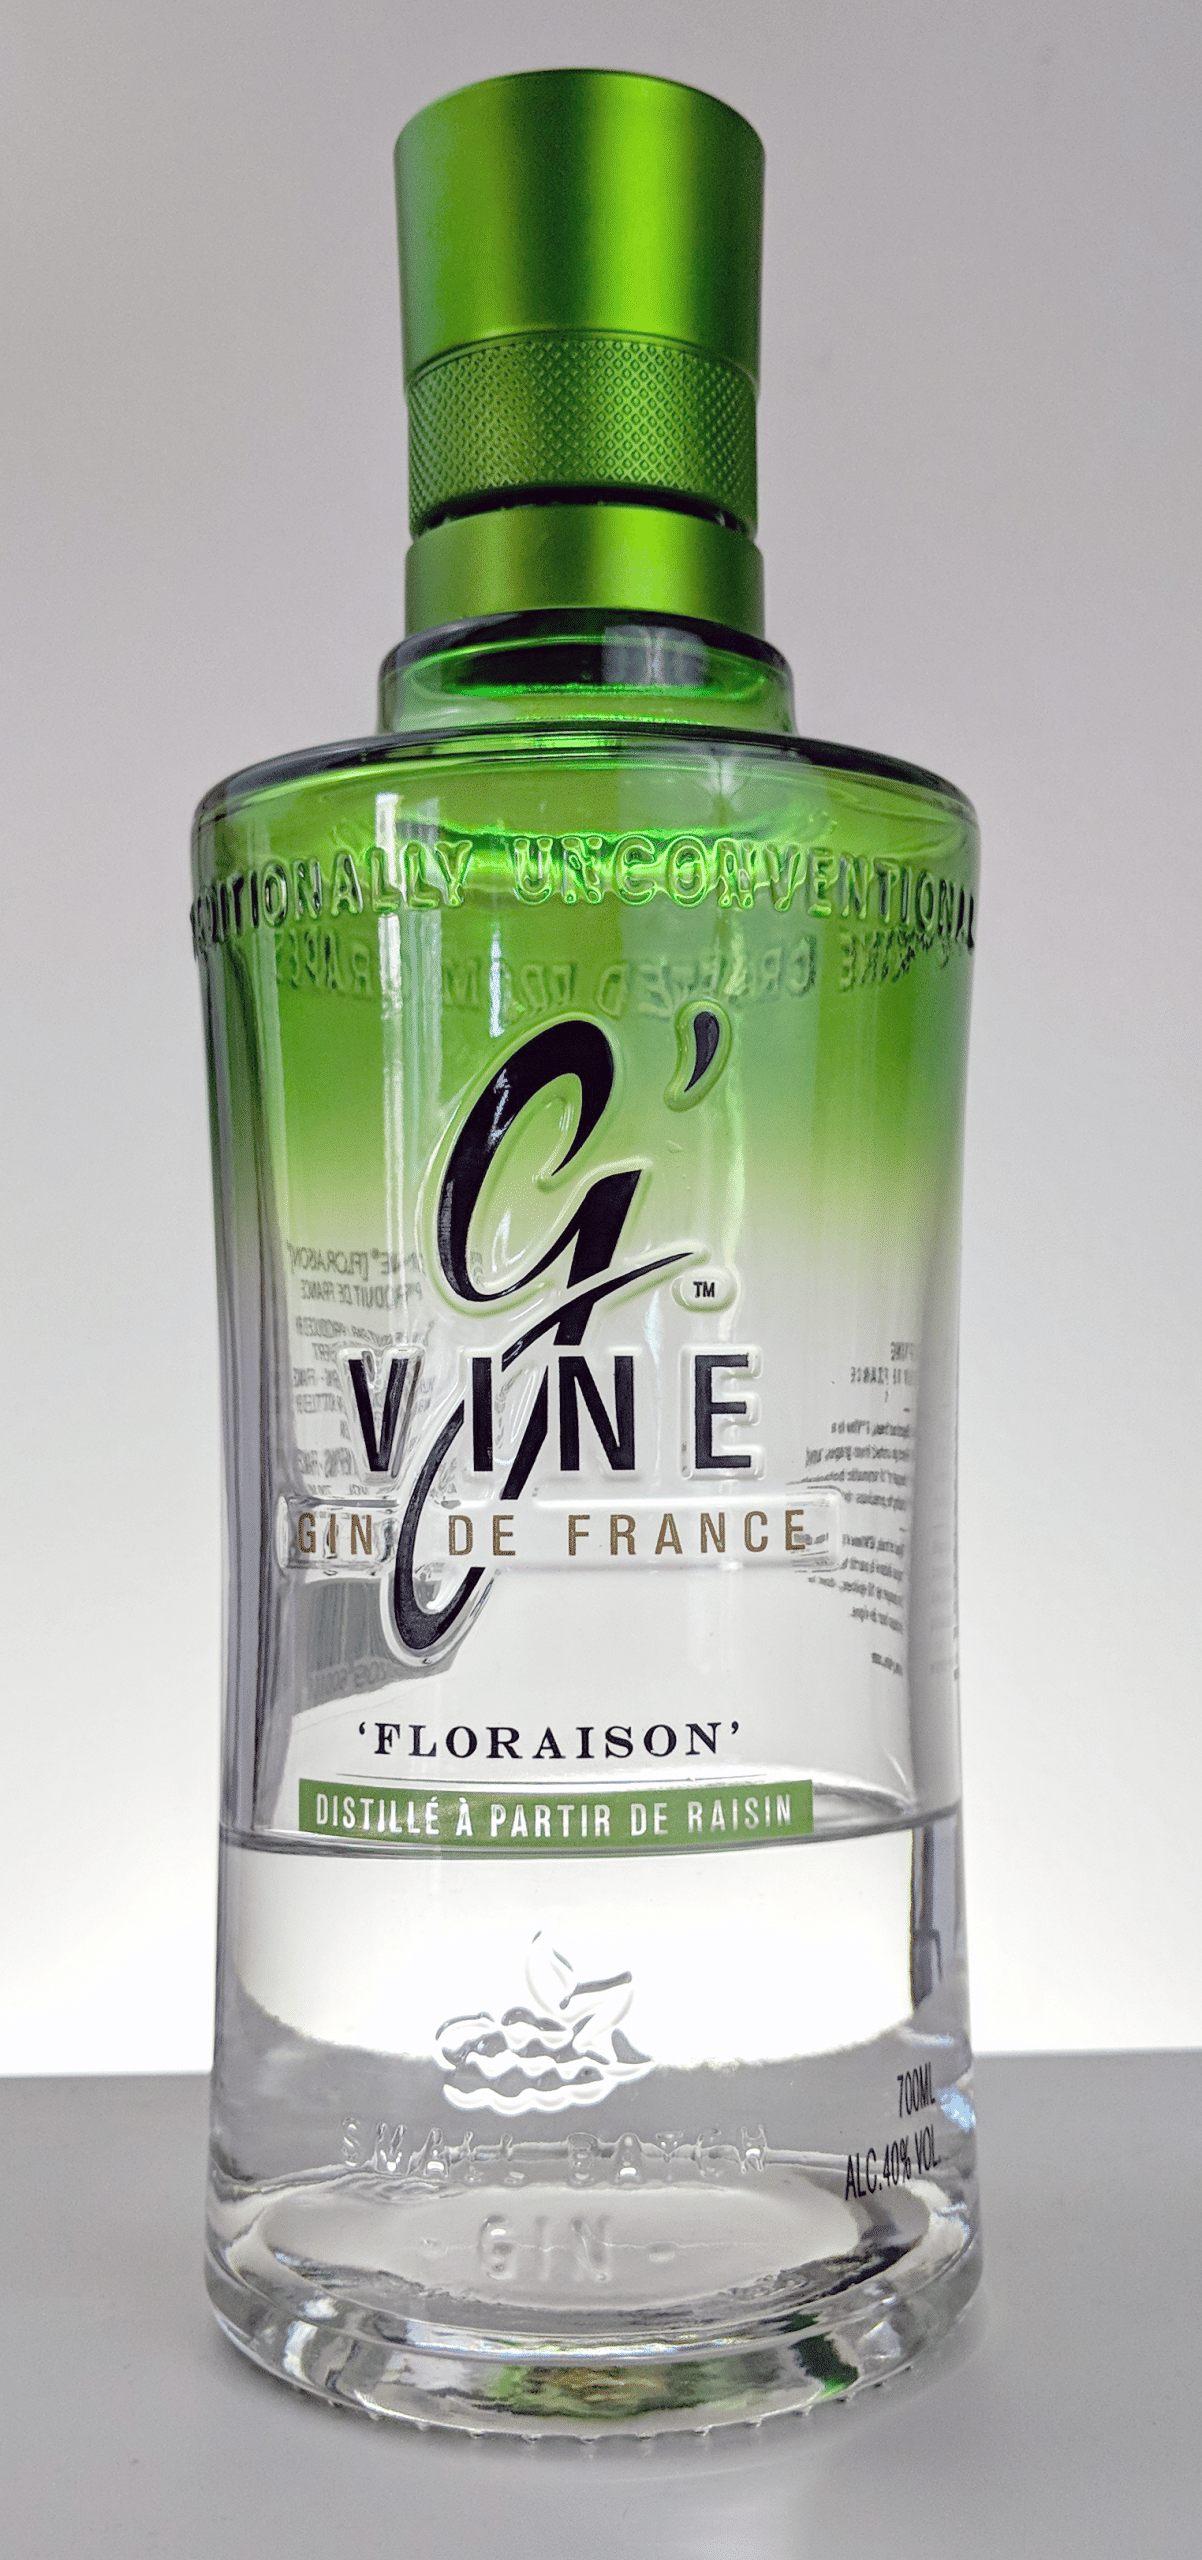 Floraison Expert G\'vine | Gin Tasting Notes and Review